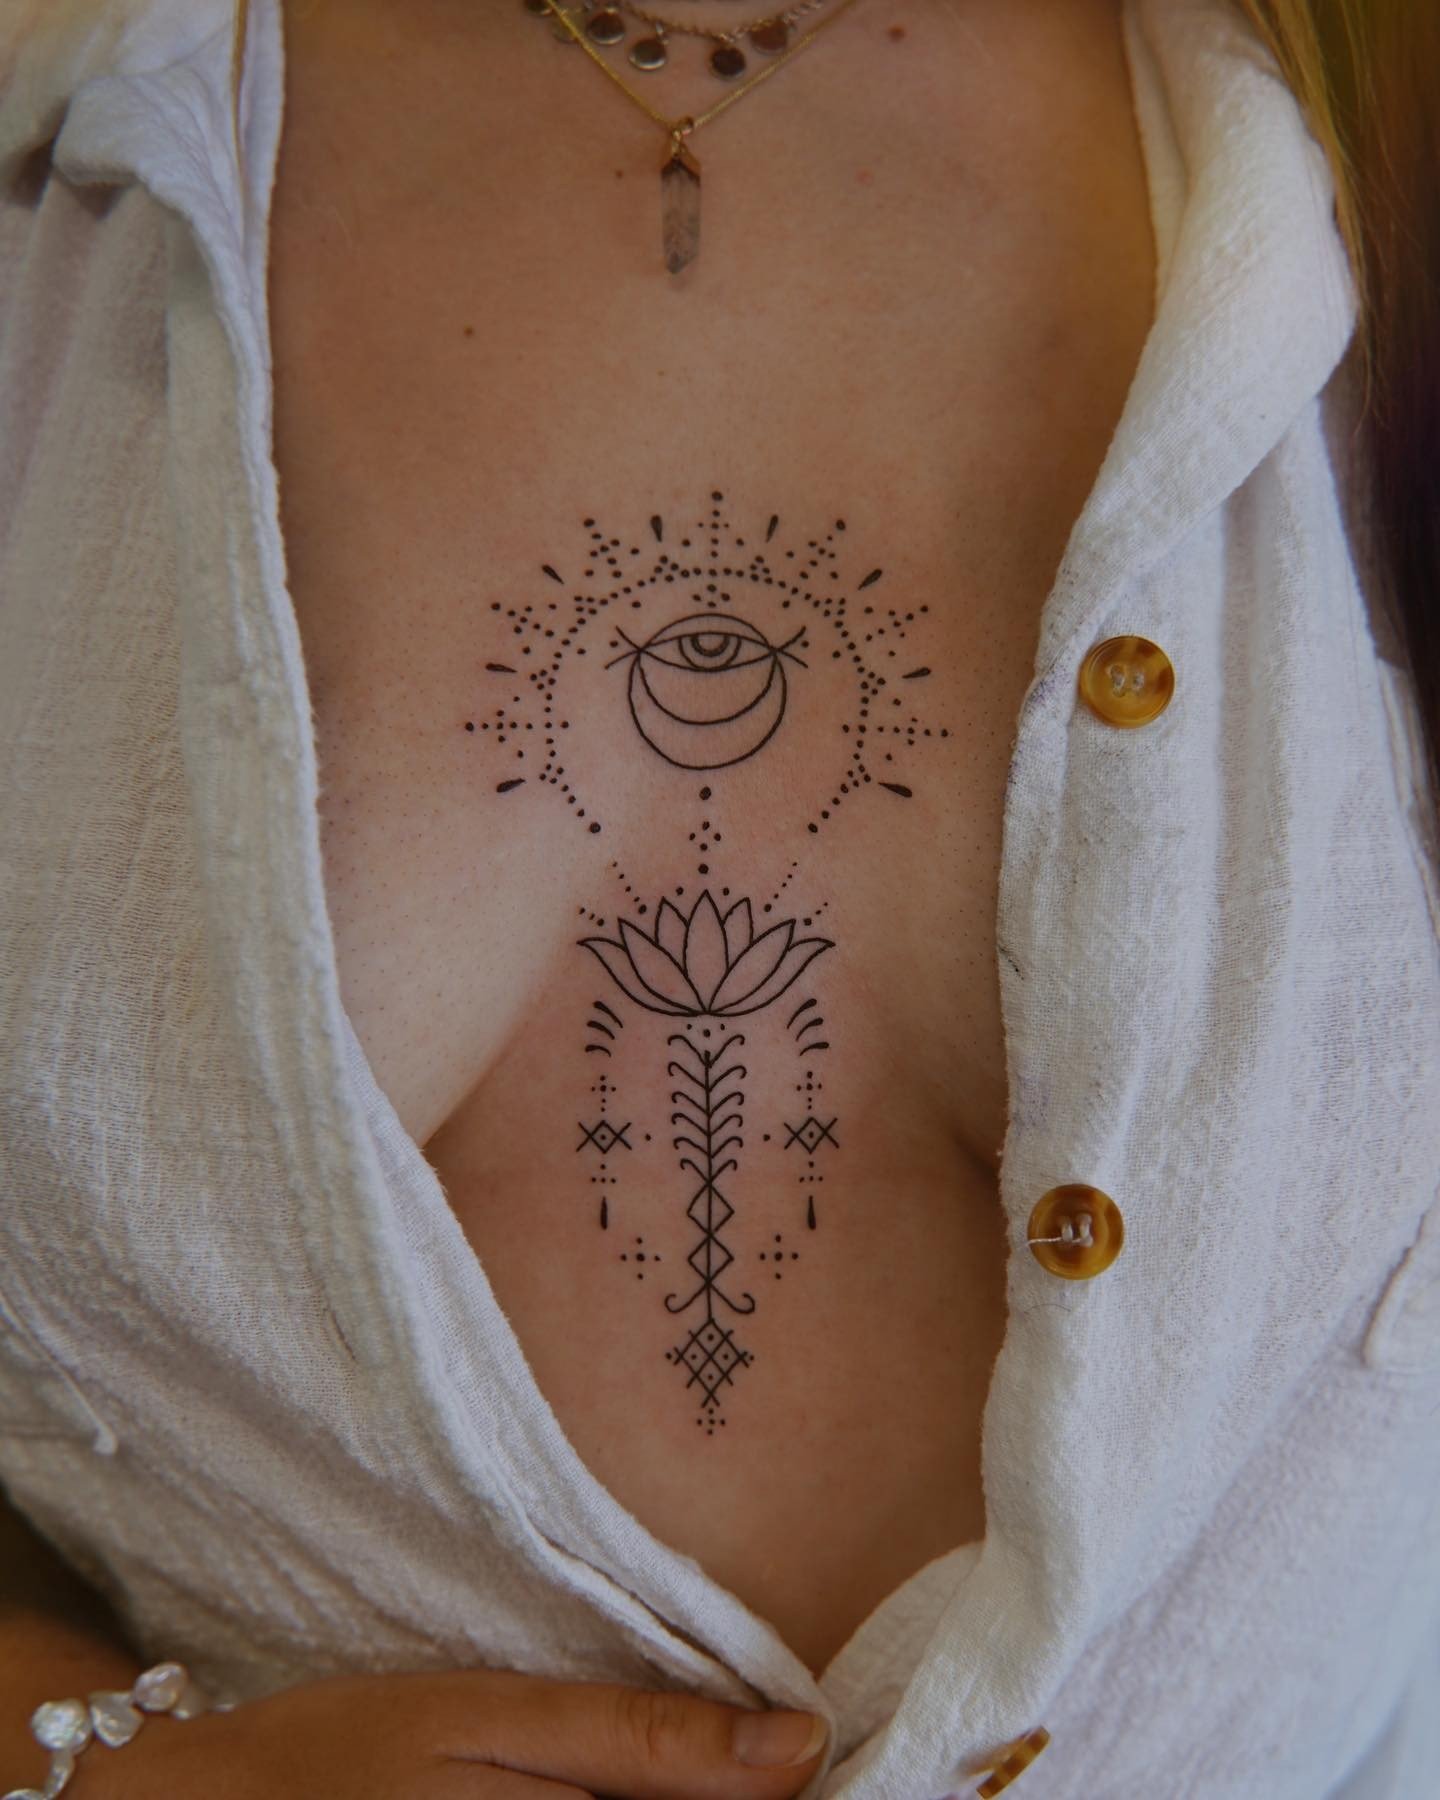 Sternum Tattoos Design Themes And Ideas